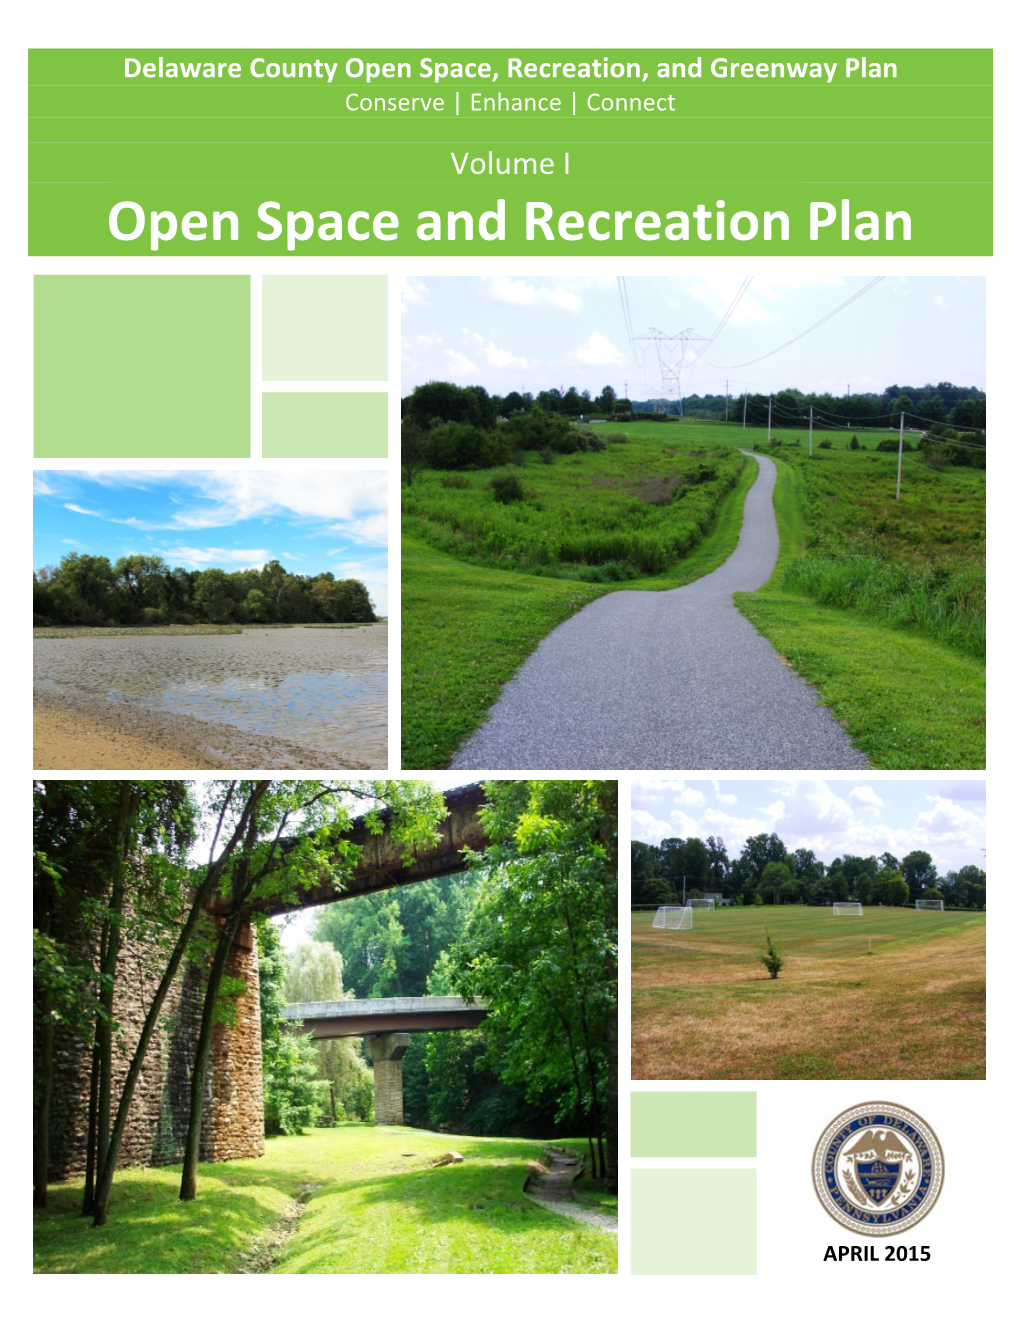 Volume I: Open Space and Recreation Plan